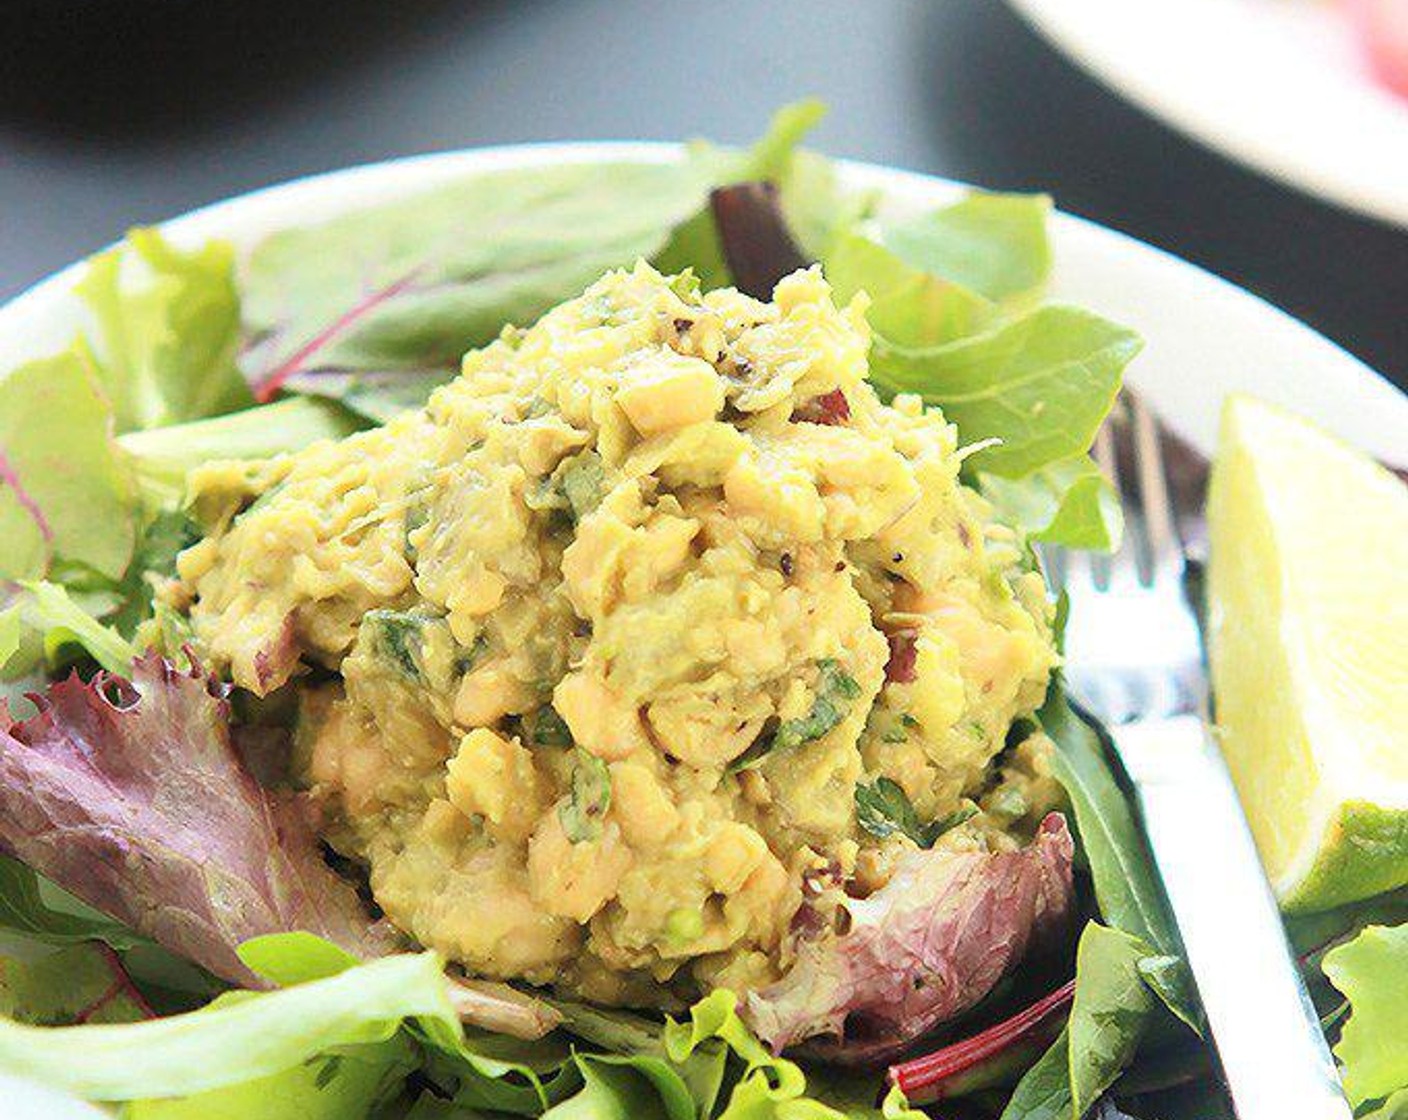 step 5 For a salad, place Salad Greens (to taste) on a plate and place a scoop of chickpea salad on top of the greens.